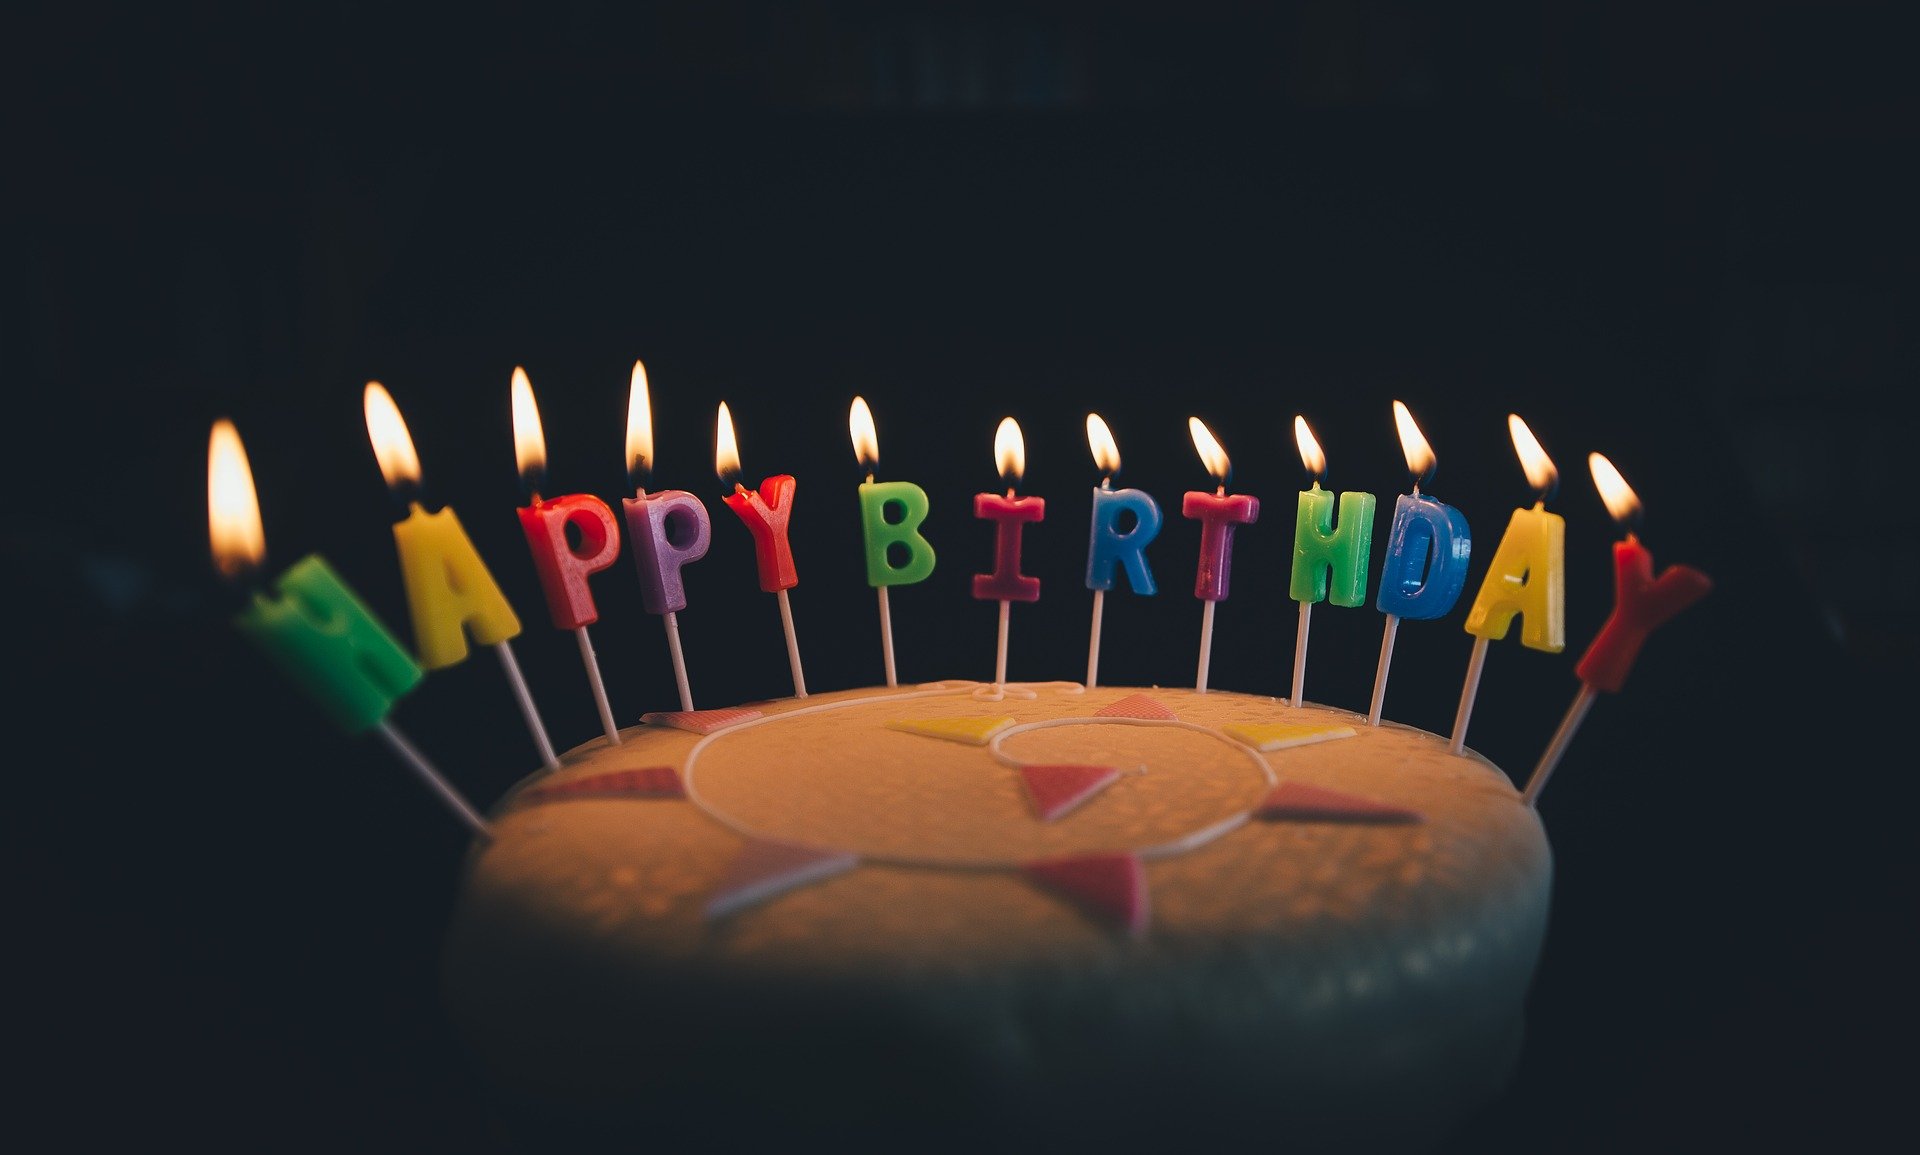 Pictured - A birthday cake with candles | Source: Pixabay